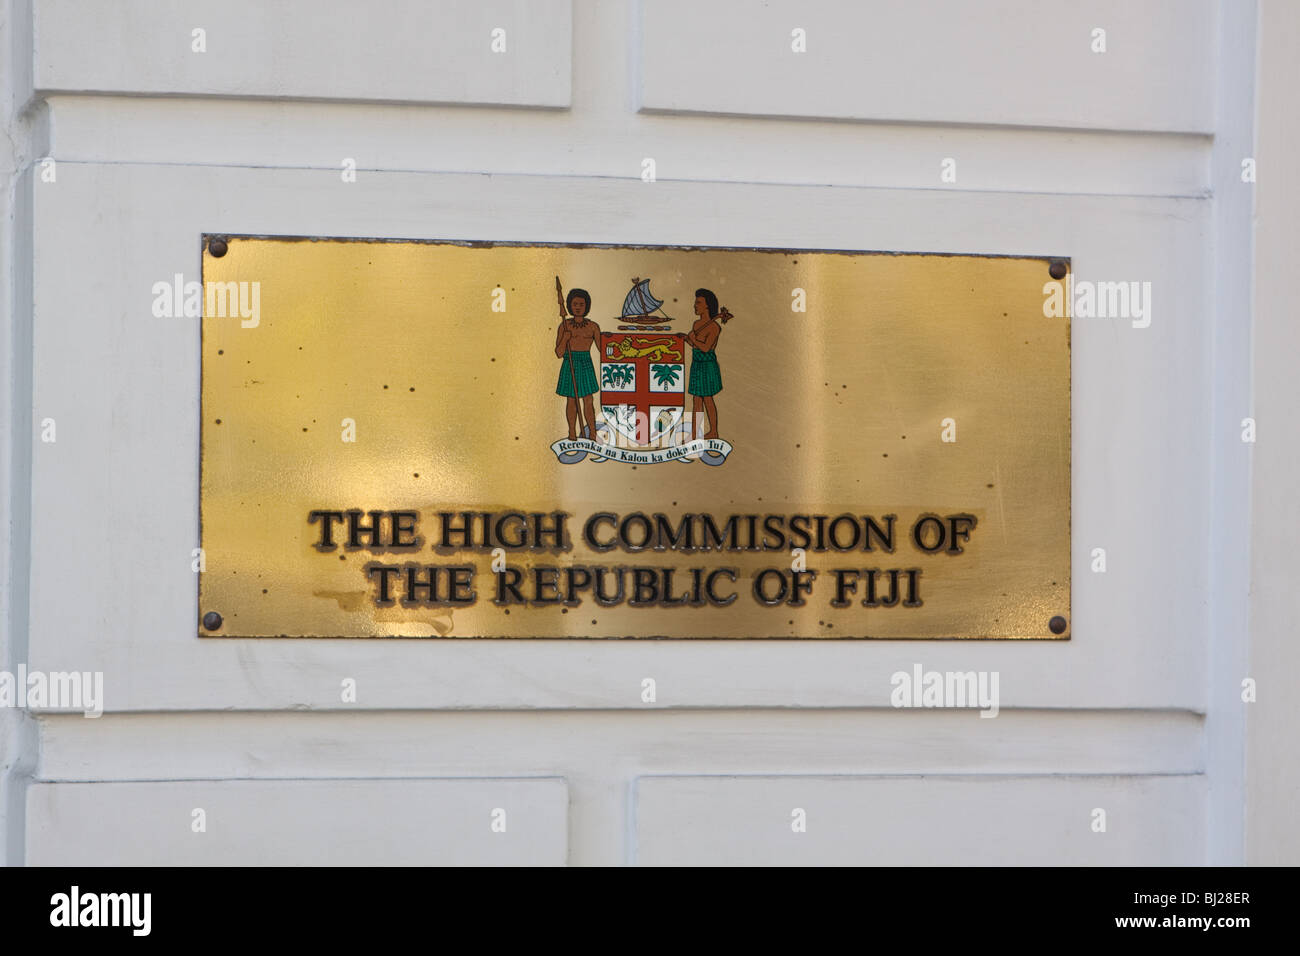 Sign Depicting the High Commission of the Republic of Fiji in Kensington London Stock Photo